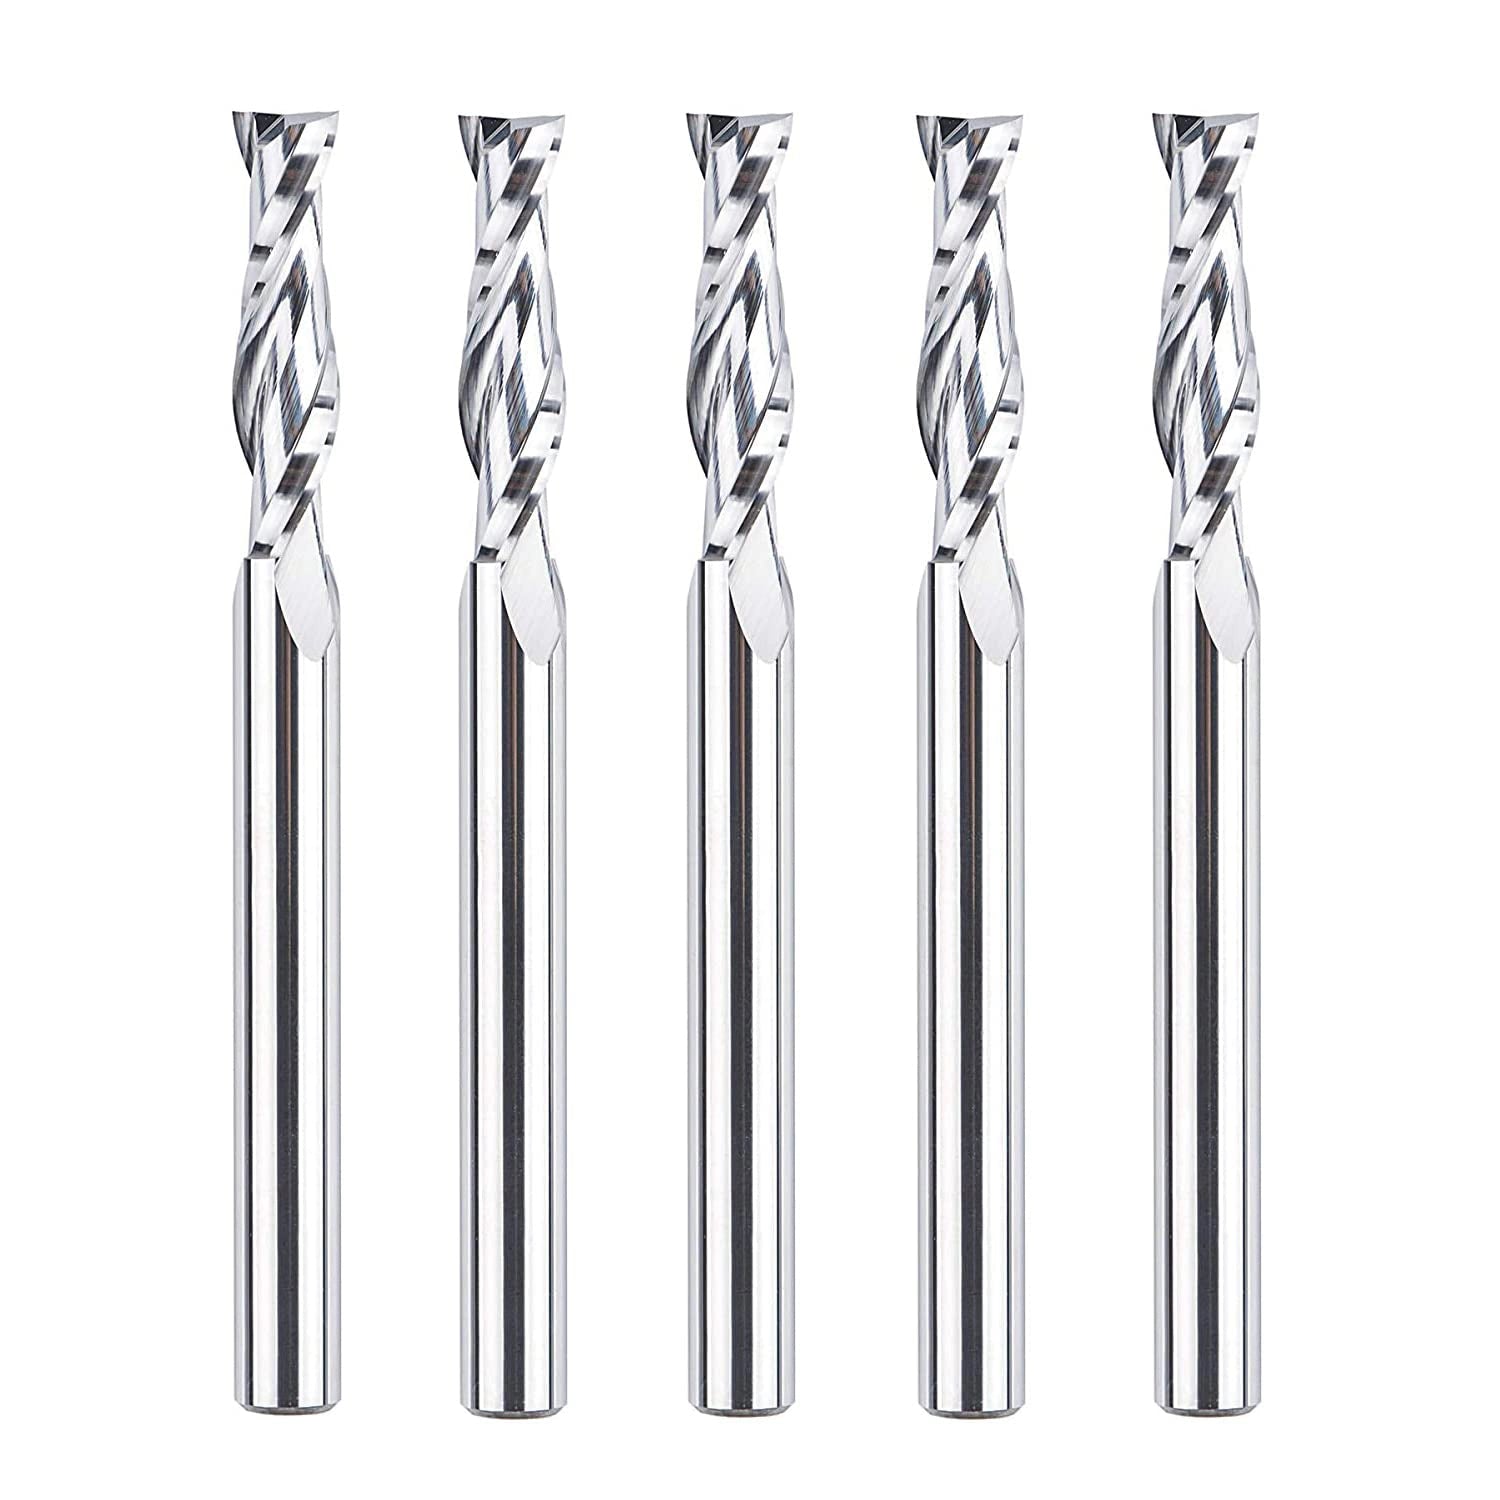 SpeTool W04016 SC Spiral Plunge 1/4" Dia x 1/4" Shank x 1" Cutting Length 3" Extra Long 2 Flute Up-Cut Router Bit